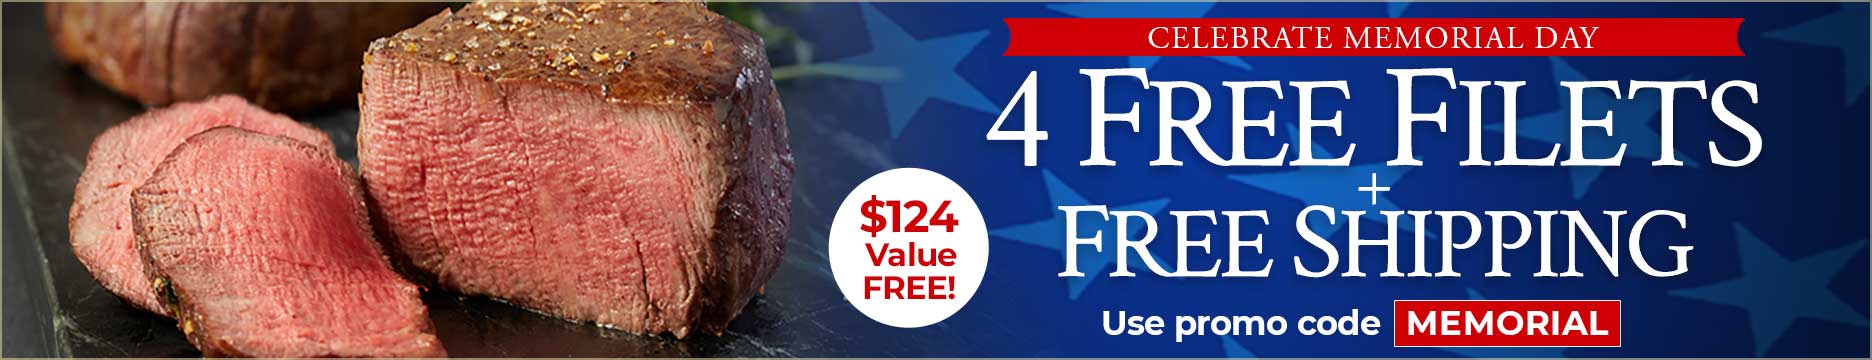 Use Promo Code:MEMORIAL to receive 4 FREE 6oz Filet Mignons Plus FREE Shipping on orders of $199+.